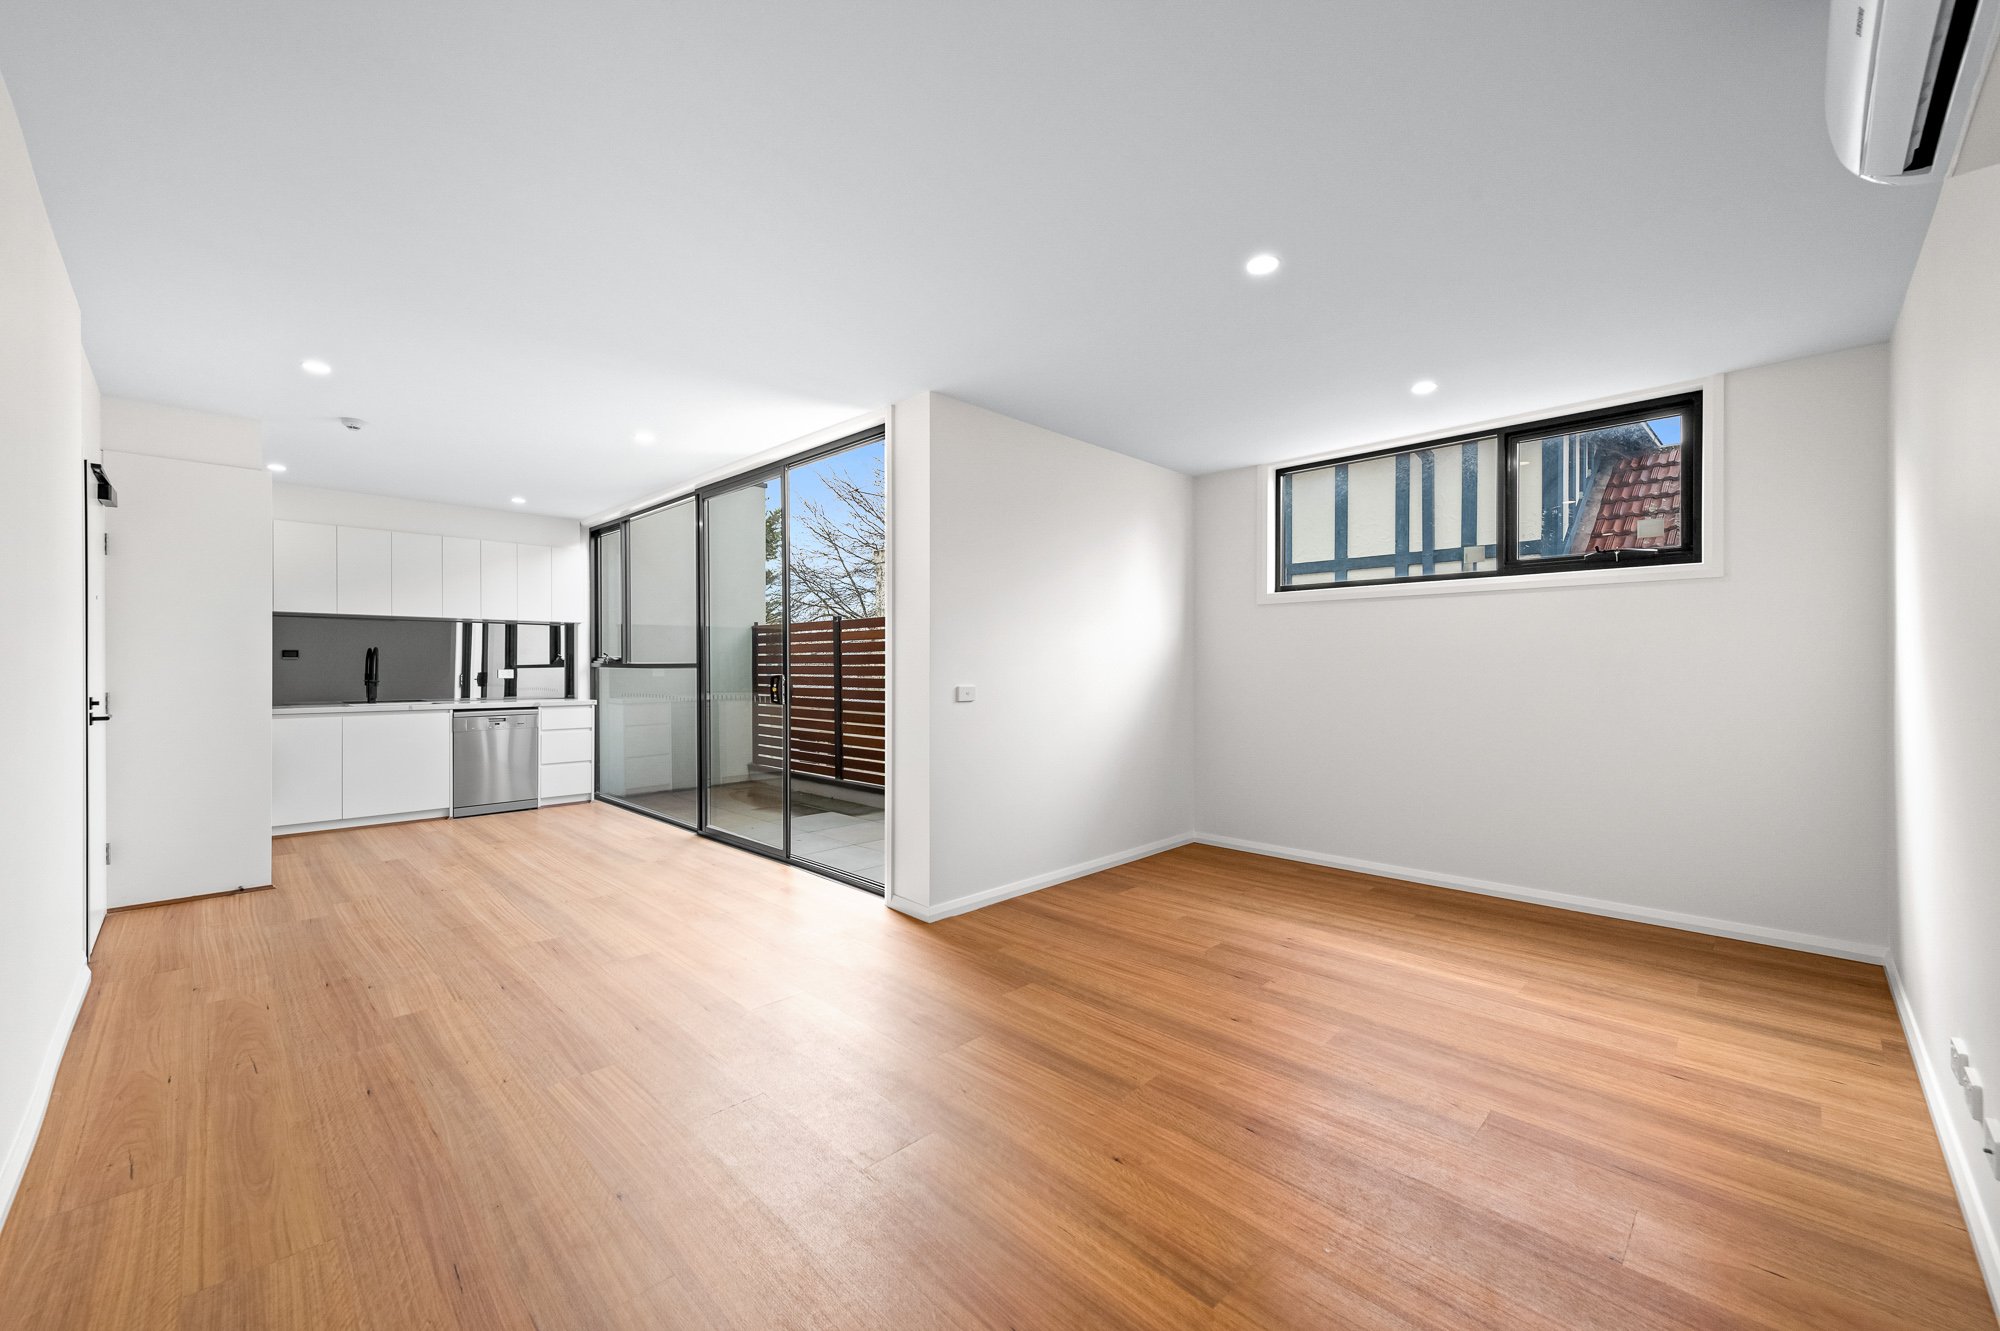 Camberwell - 1282 Toorak Road, Camberwell, VIC 3124 - Townly - 7.jpg